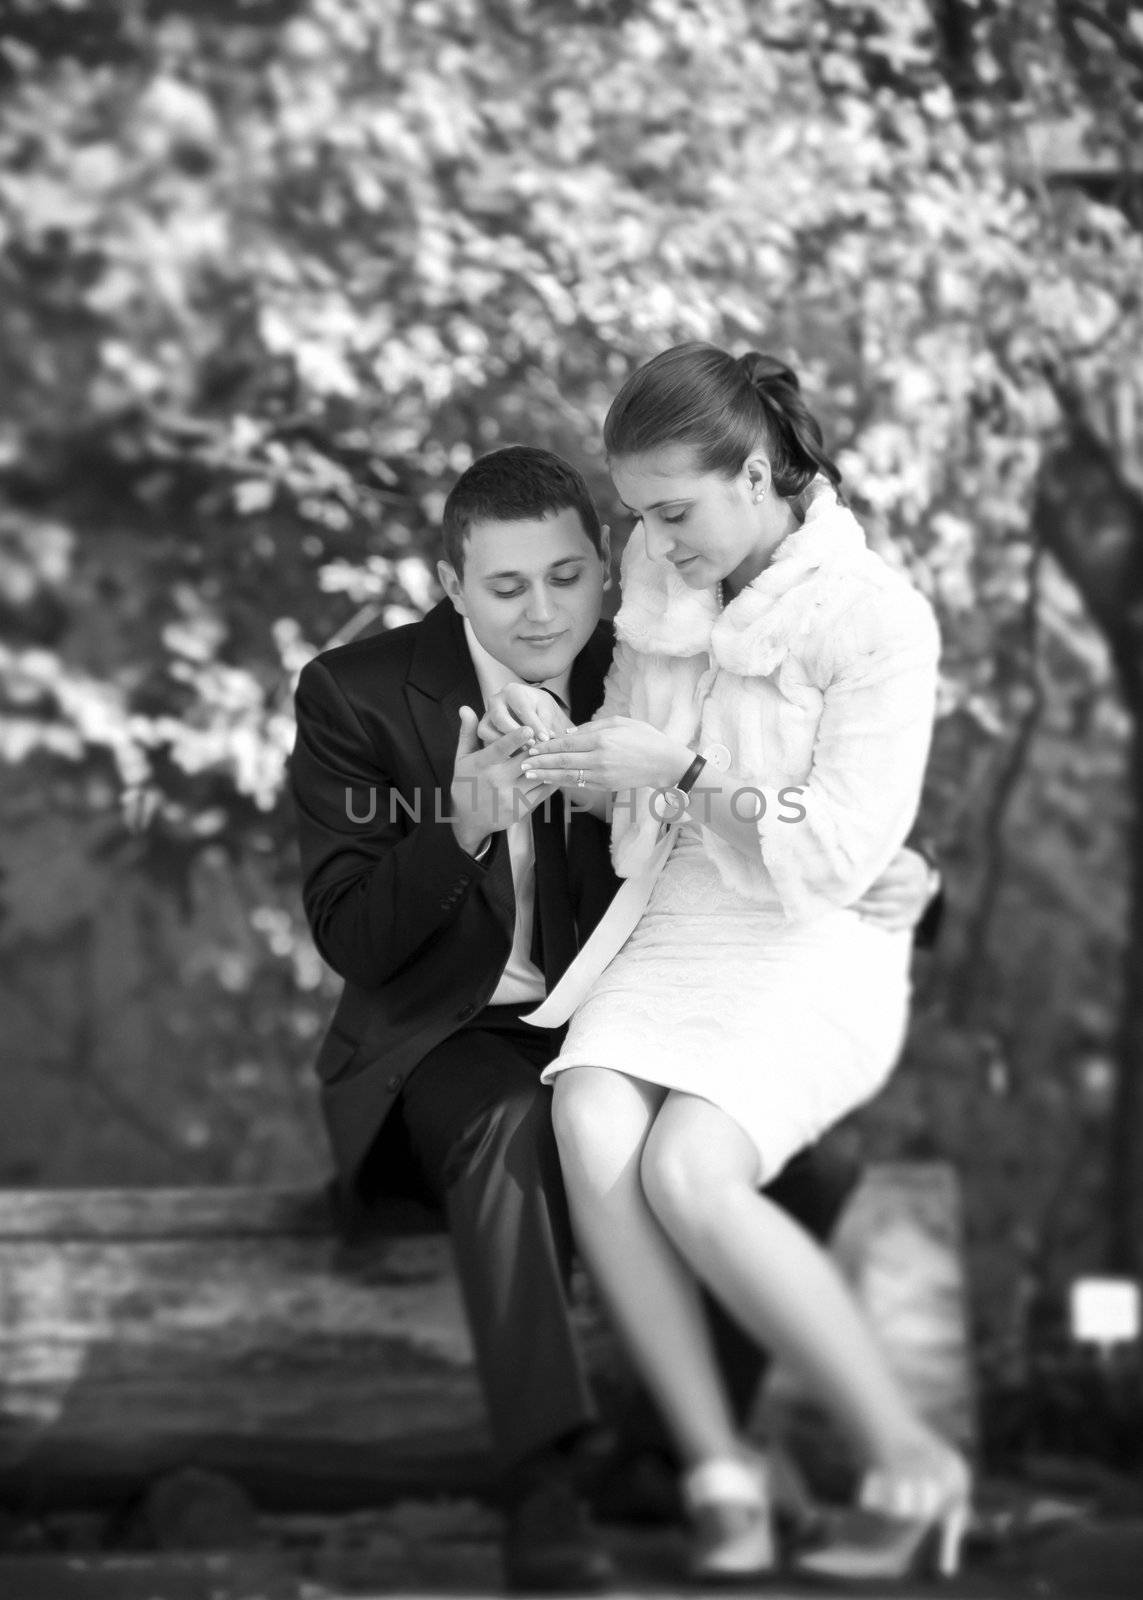 Black and white photography of a young married couple